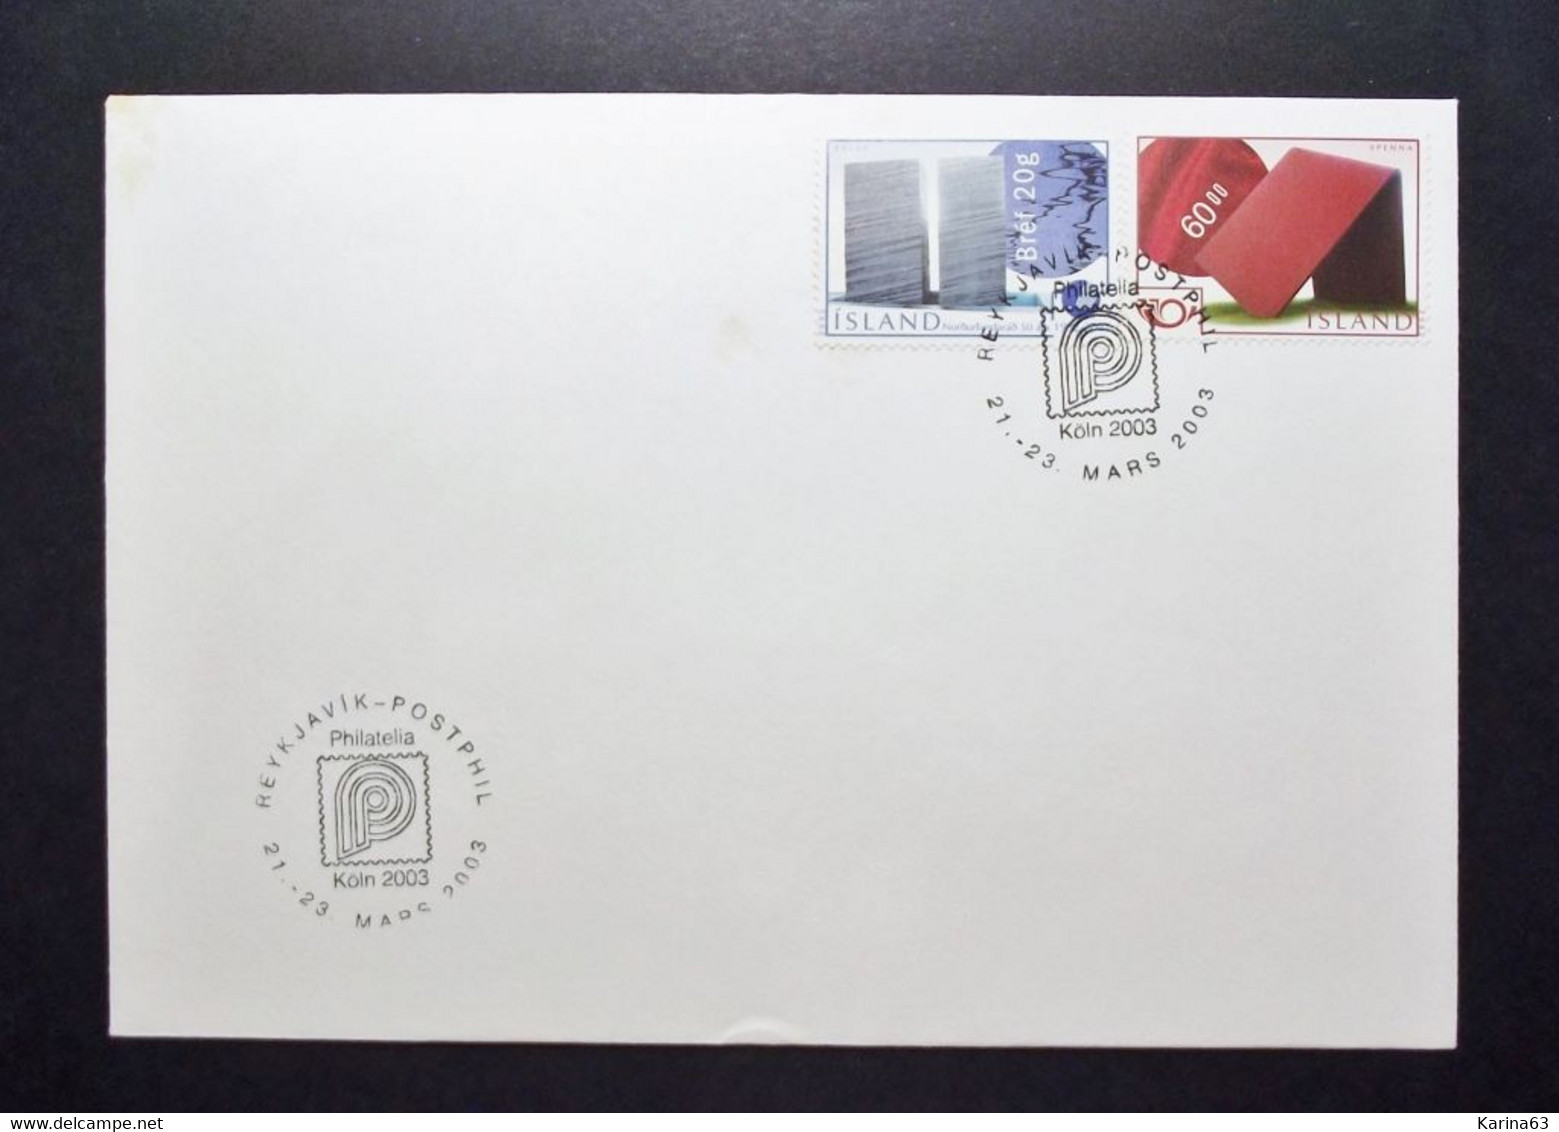 Island - Iceland - 2002 -  Norden Joint Issue Art Of 20th Centuary Norden - Fyssa   - Obl On Envelope - Lettres & Documents